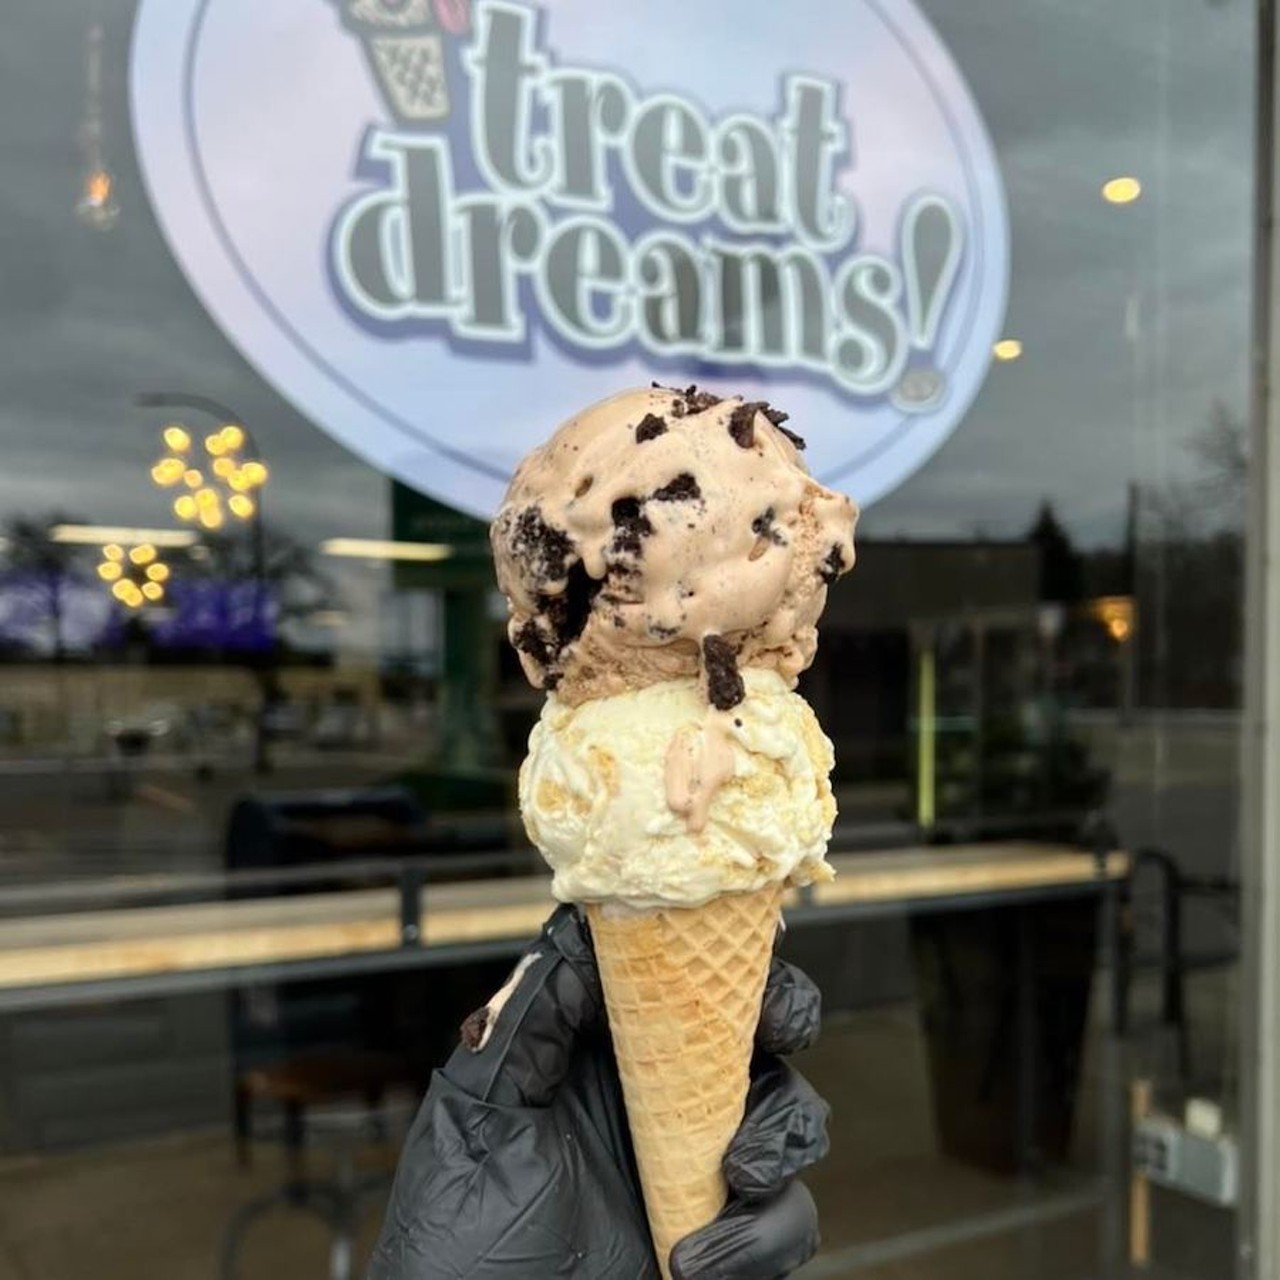 Treat Dreams
22965 Woodward Ave., Ferndale; 248-544-3440 | 4160 Cass Ave., Detroit; 313-818-0084 |  621 E. 11 Mile Rd., Madison Heights
Treat Dreams rotates its ice cream flavors often, but don’t think you’ll only go and find chocolate or vanilla. You might walk in and see lobster bisque or zucchini bread on the menu. The shop just recently opened a Madison Heights location that is walk-up and drive-thru only.